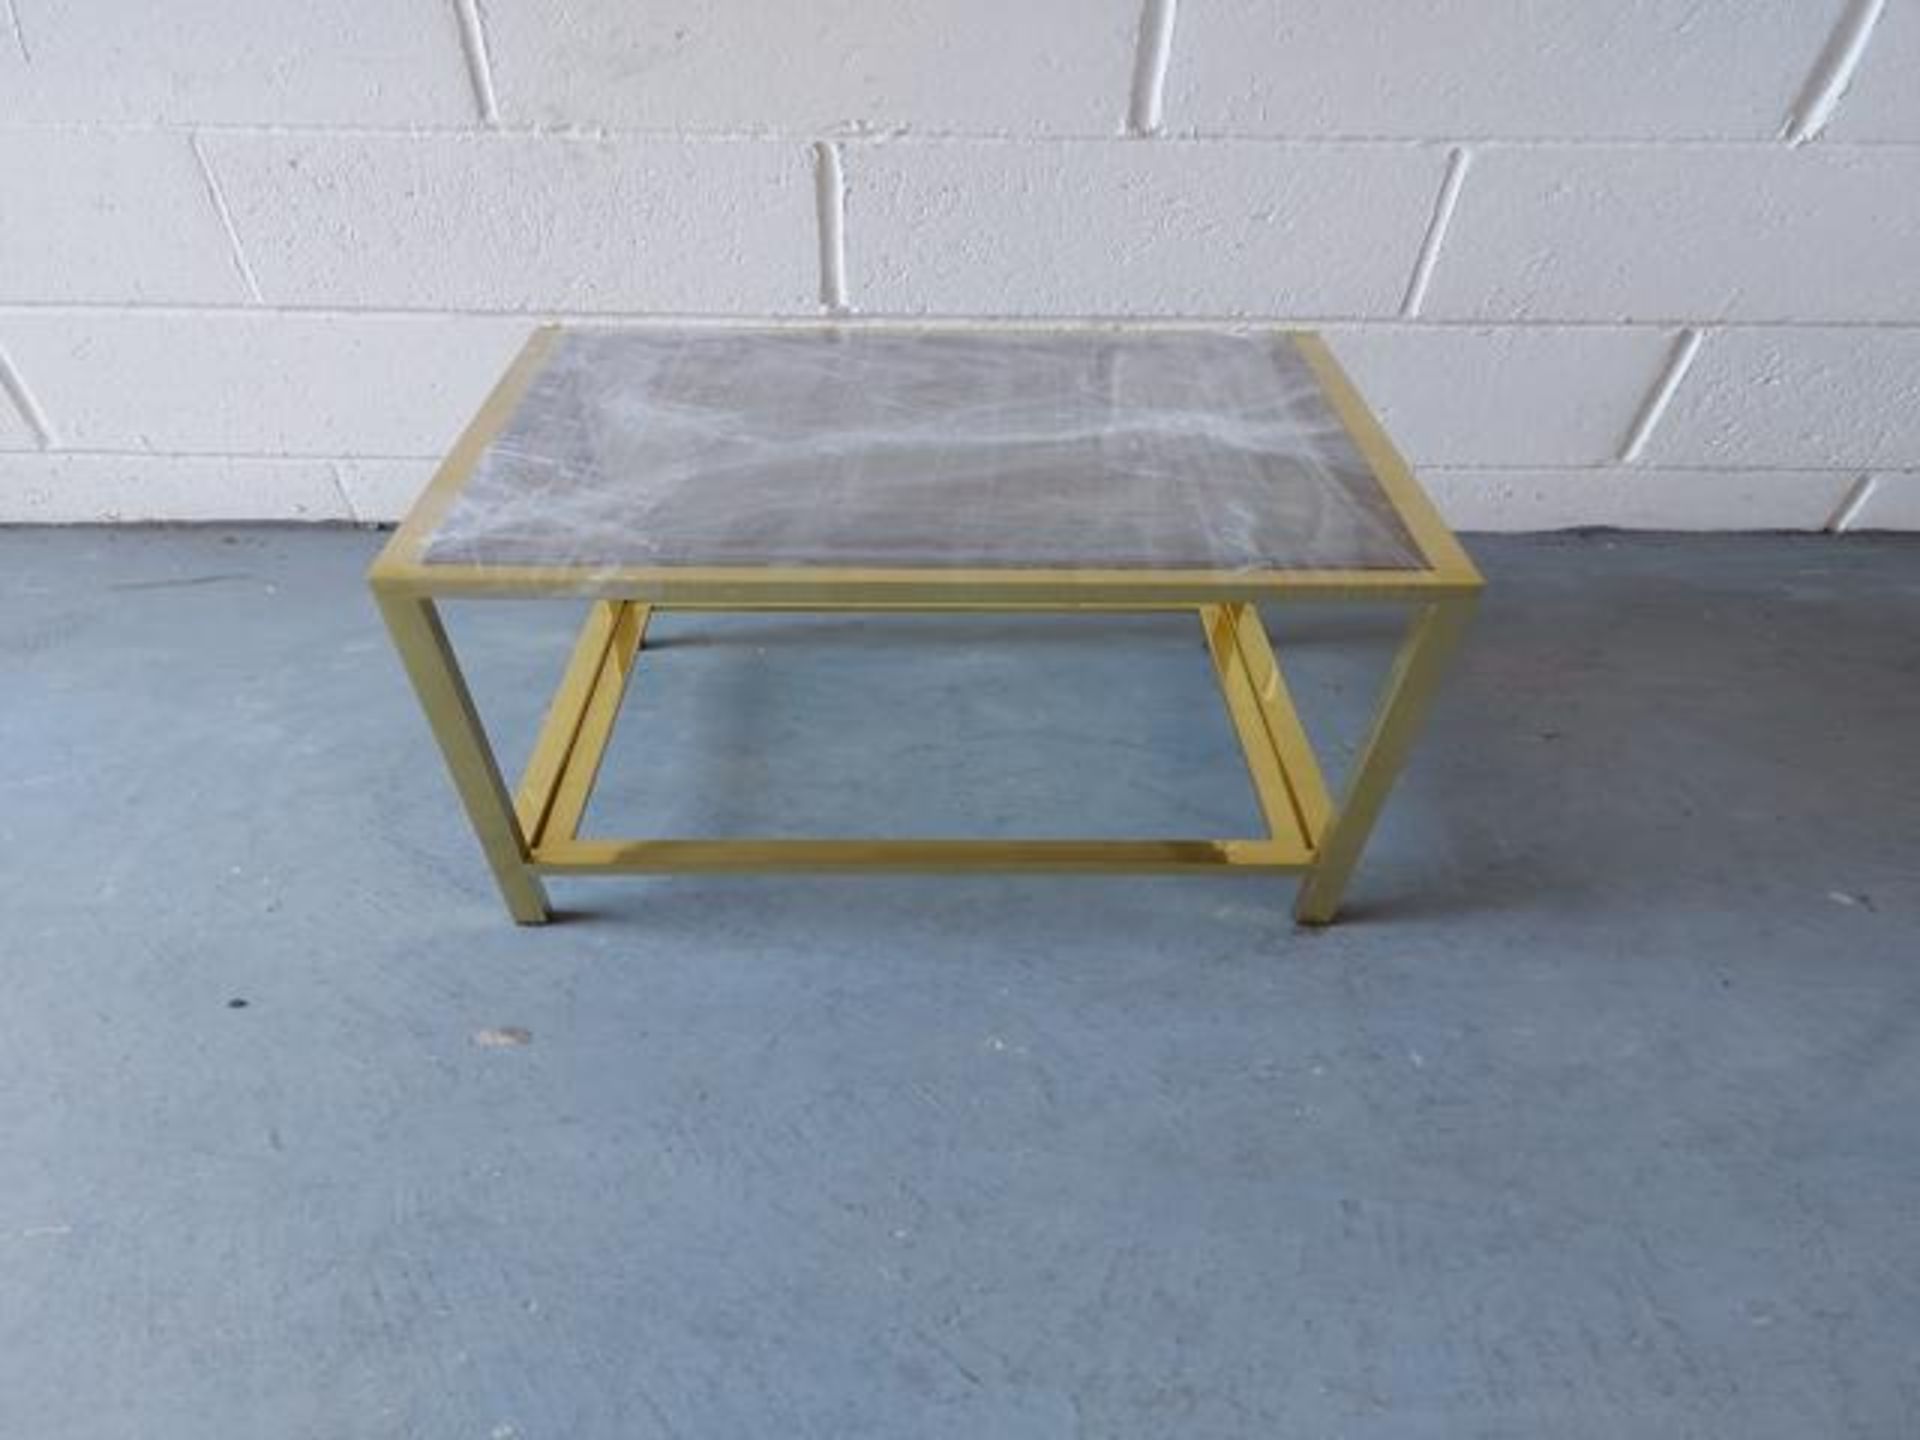 Gold frame glass topped table - Image 2 of 2